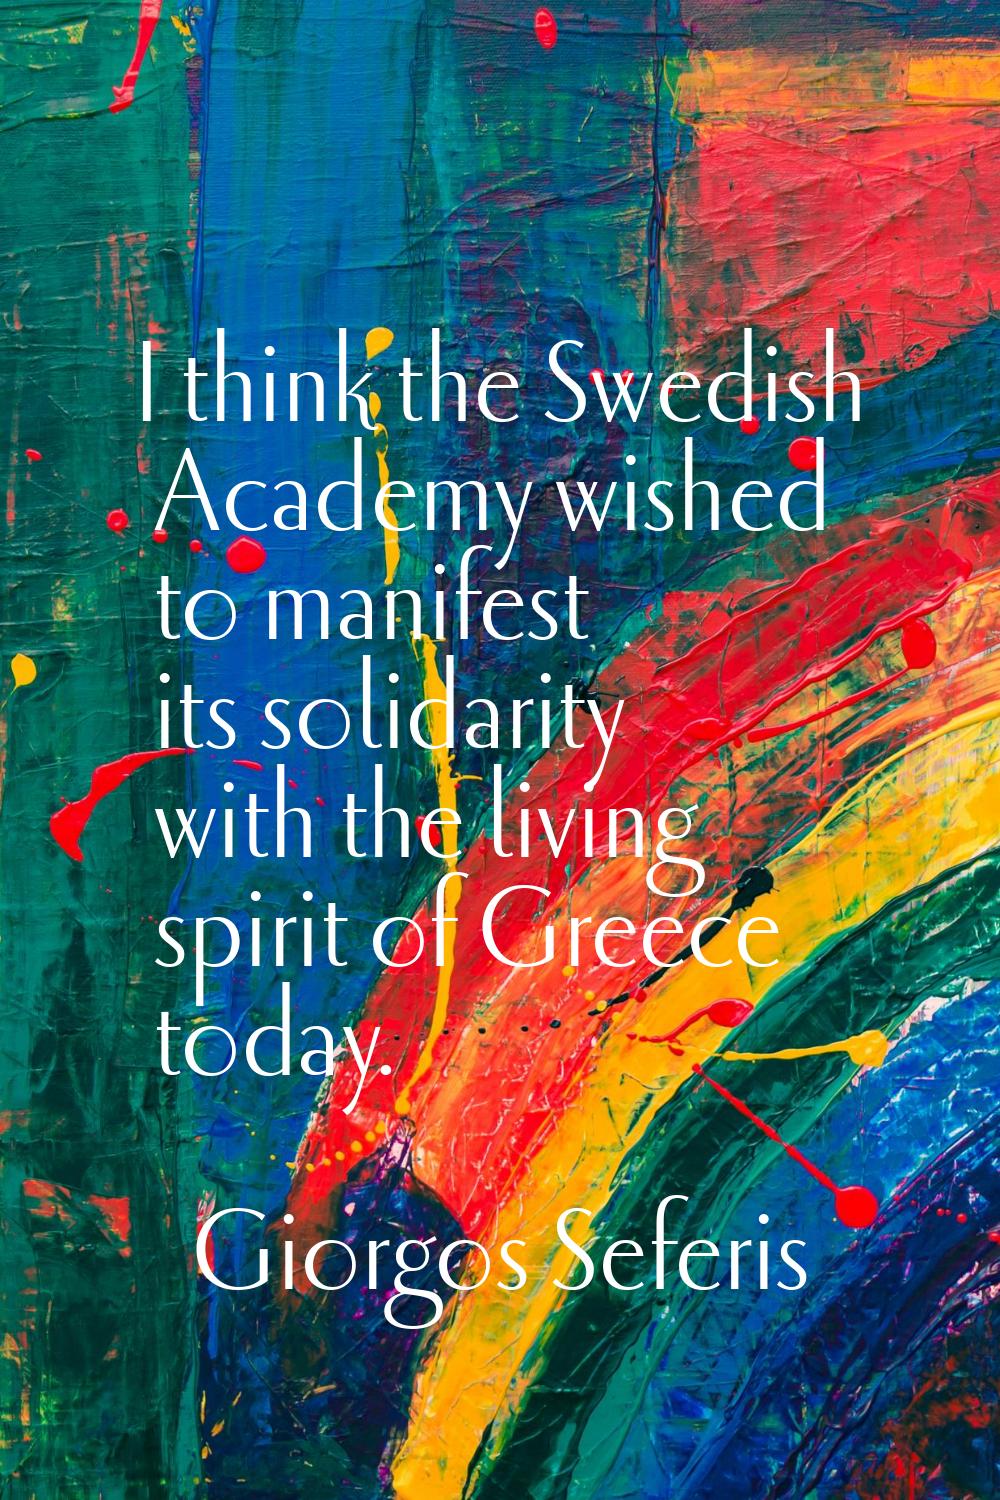 I think the Swedish Academy wished to manifest its solidarity with the living spirit of Greece toda